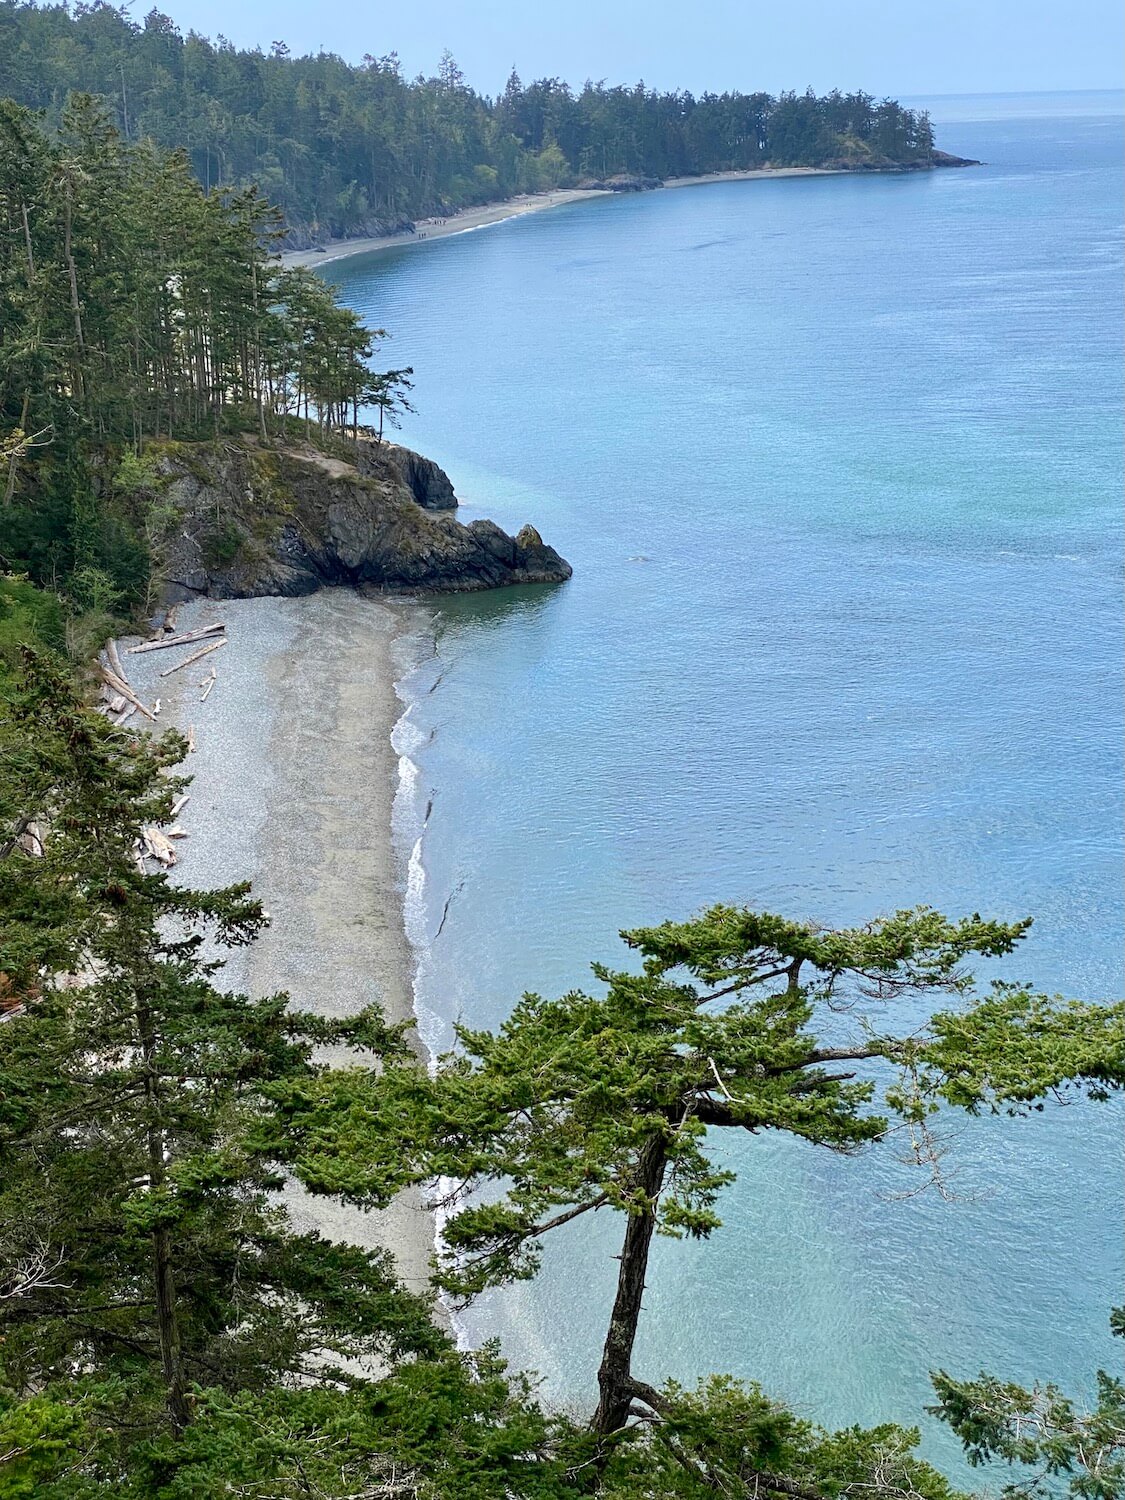 A dramatic view of North Beach at Deception Pass State Park shows long spans of pebble beaches with rocky cliffs, covered with scraggly fir trees jutting out into the sea.  